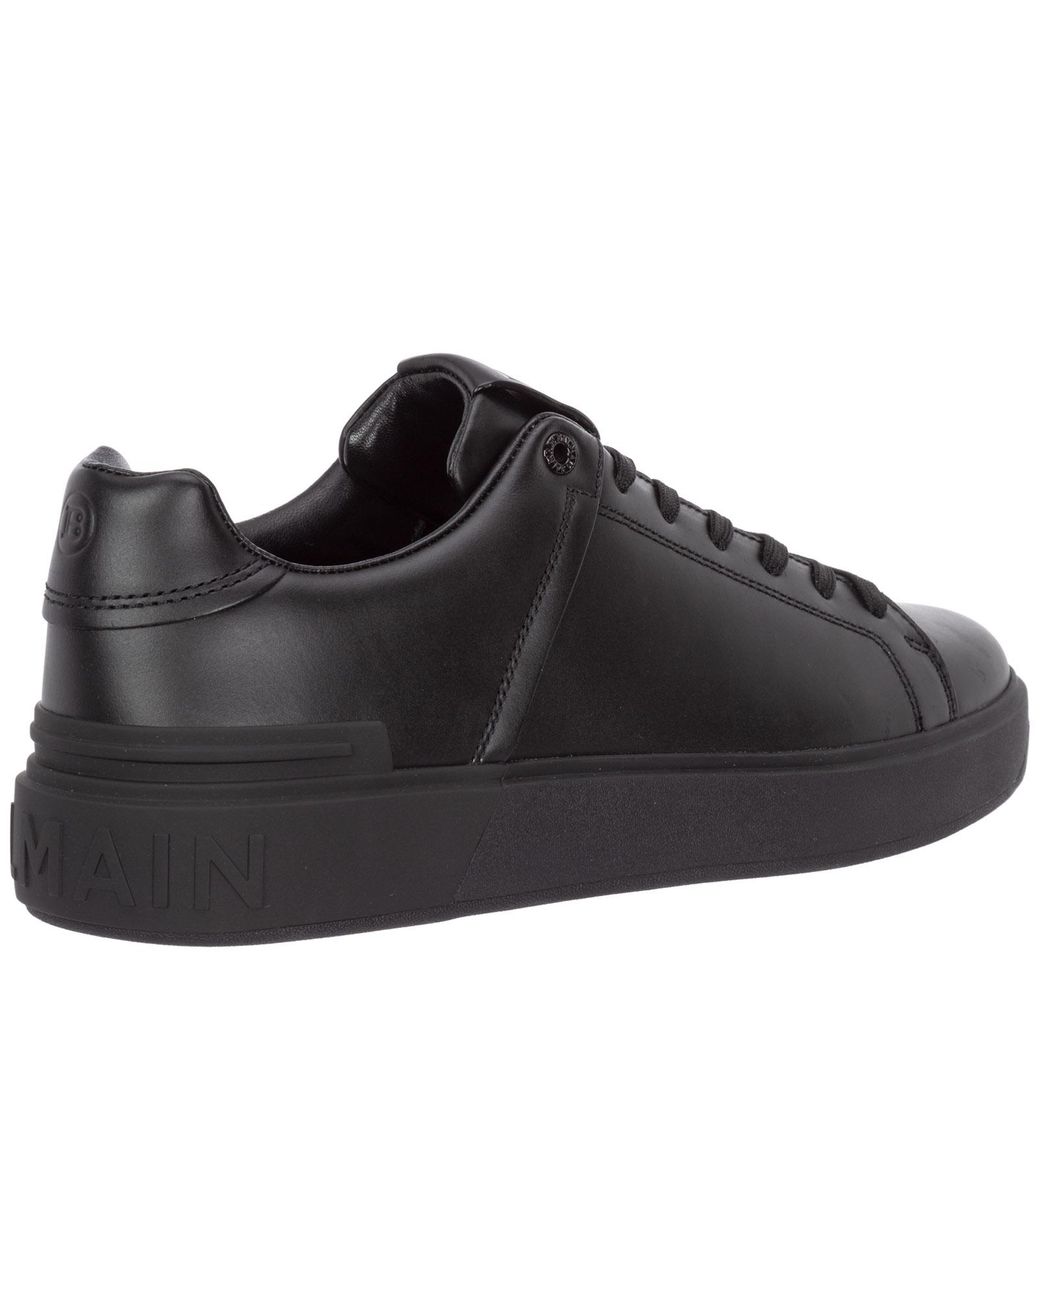 Balmain Shoes Leather Trainers Sneakers B-court in Nero (Black 